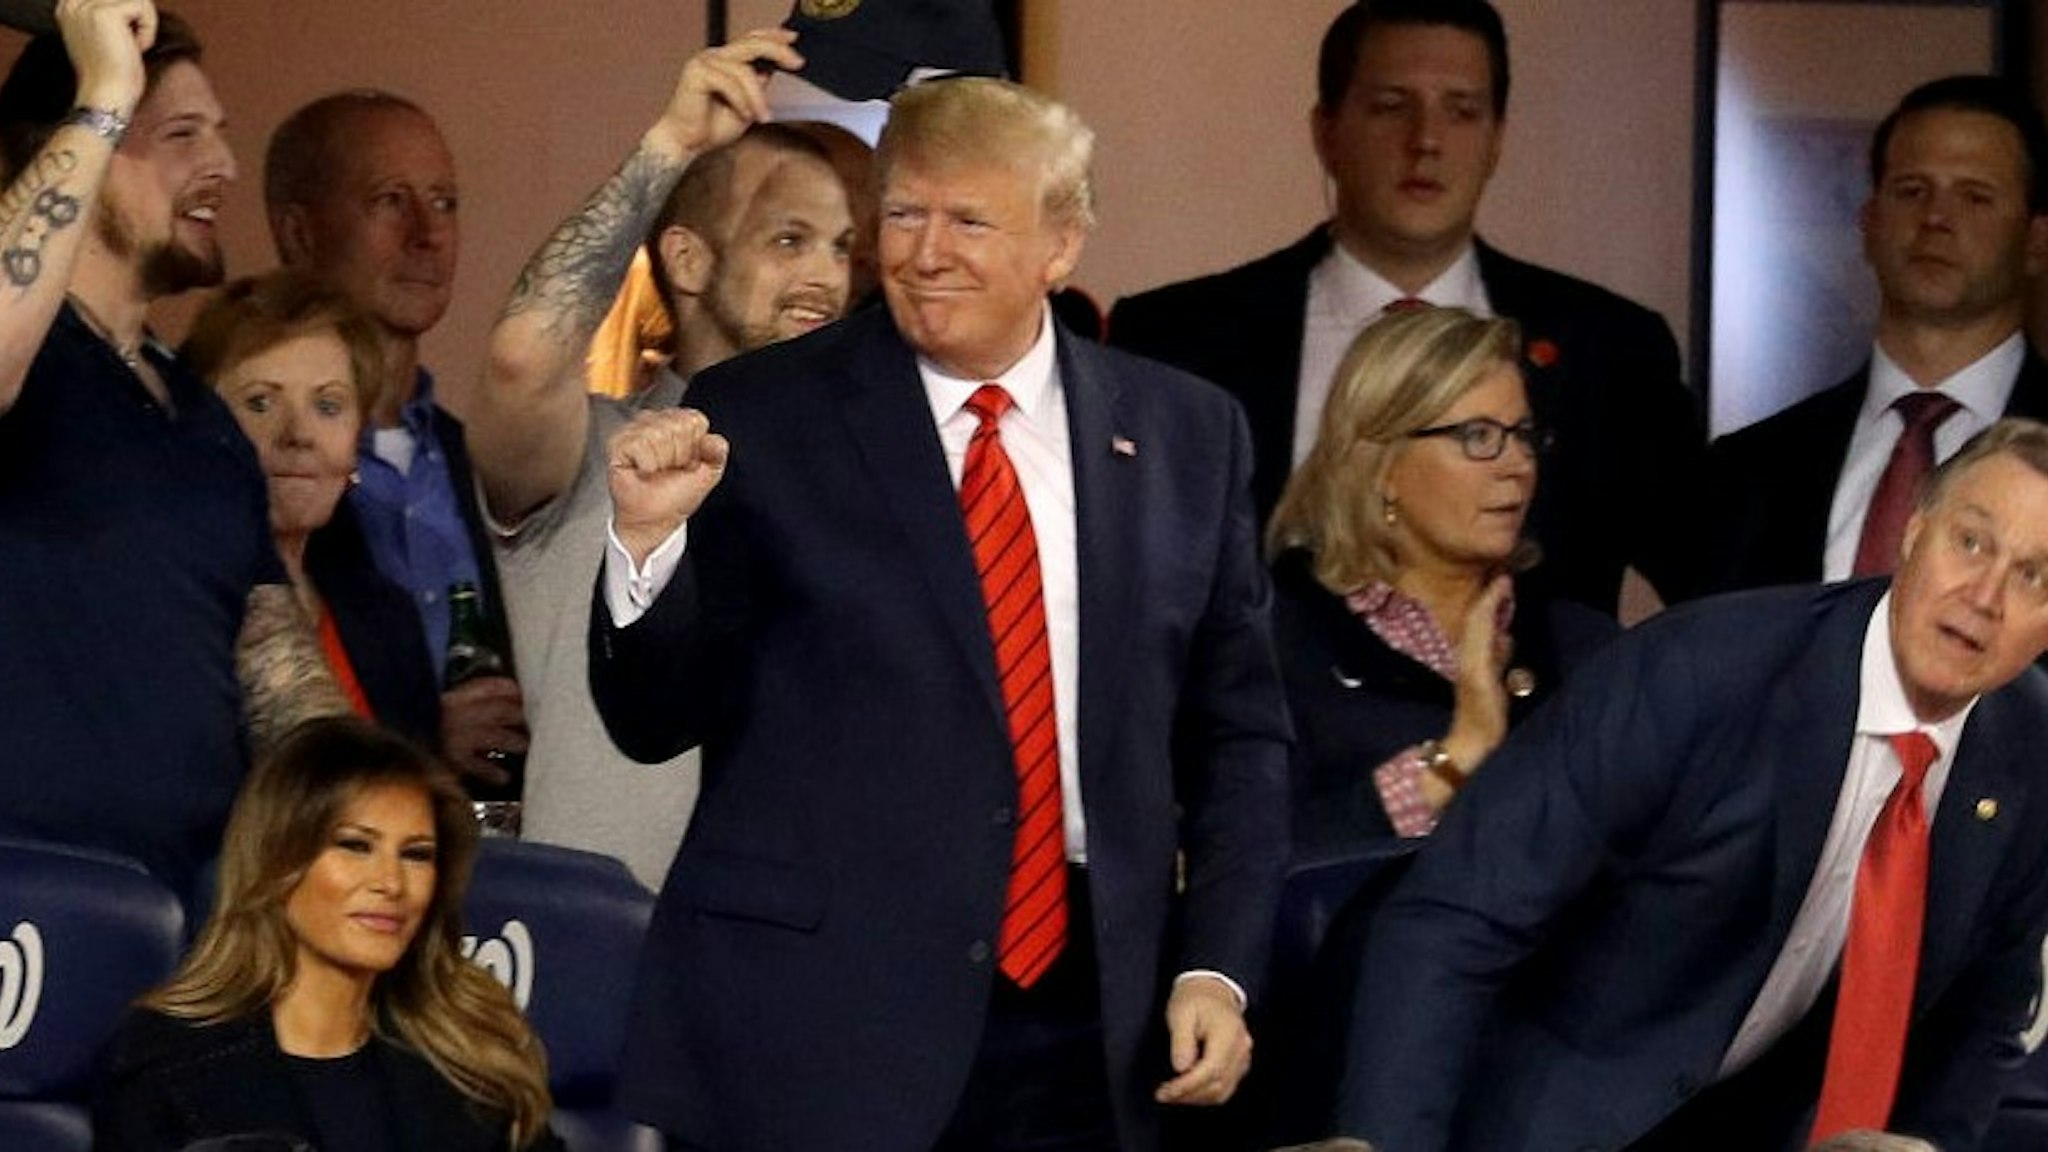 President Donald Trump attends Game Five of the 2019 World Series between the Houston Astros and the Washington Nationals at Nationals Park on October 27, 2019 in Washington, DC. (Photo by Will Newton/Getty Images)